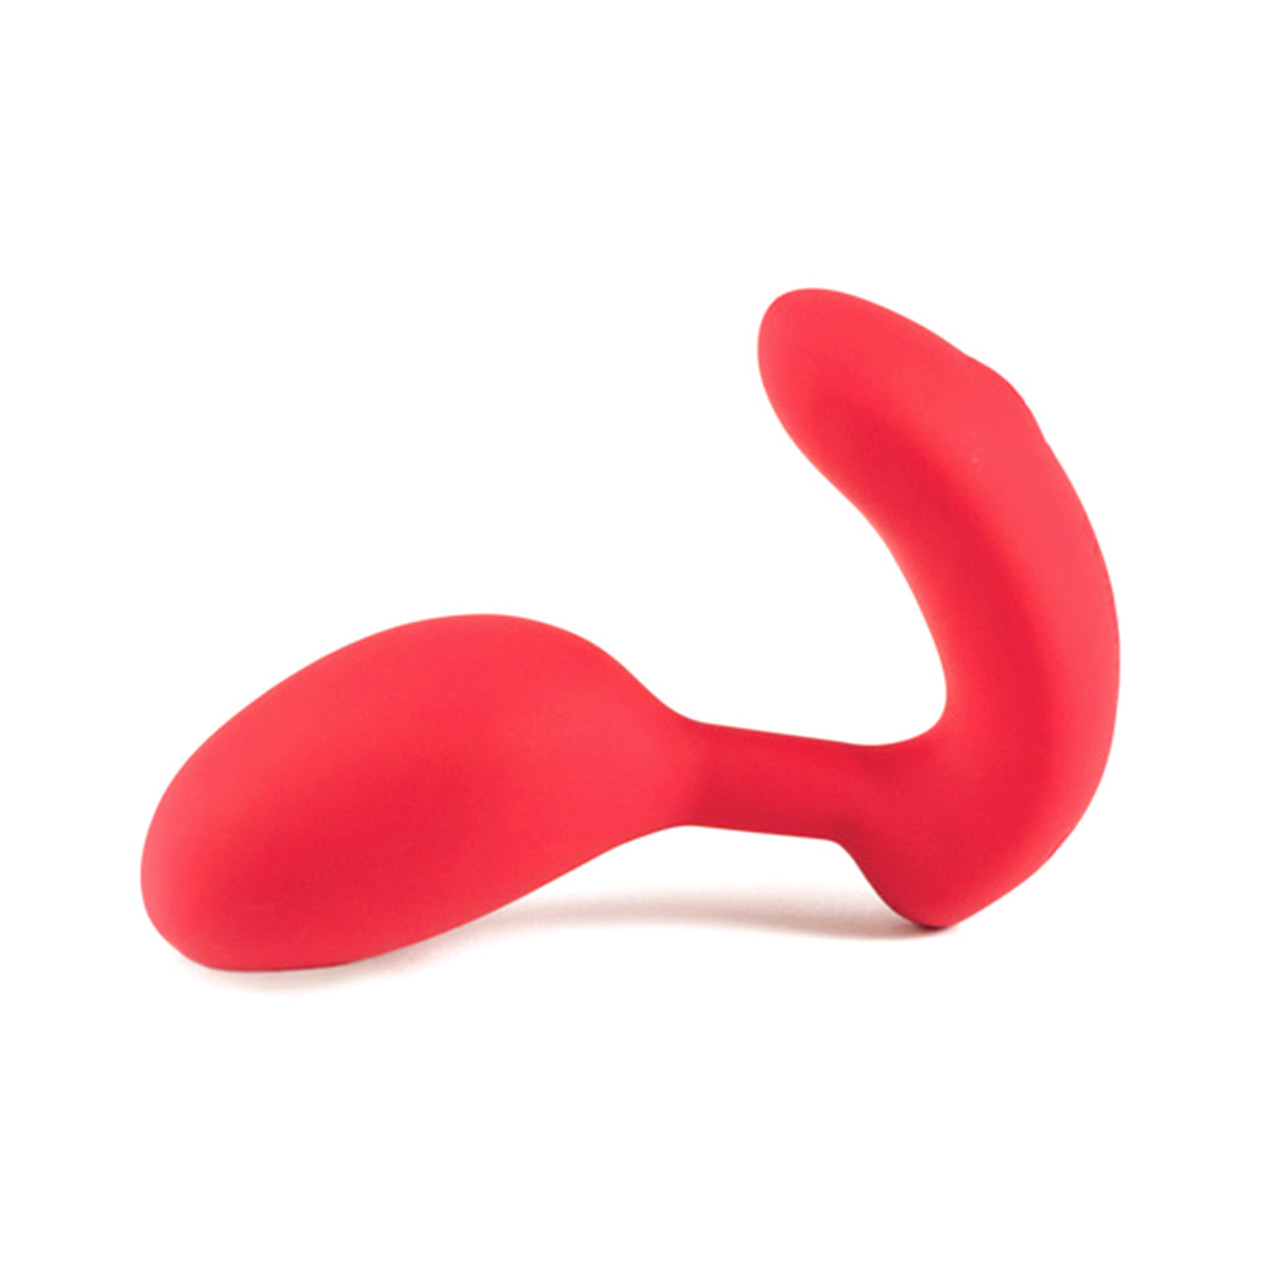 https://cdn11.bigcommerce.com/s-rph88/images/stencil/1280x1280/products/22028/181570/aneros-vivi-21-function-rechargeable-hands-free-g-spot-clitoral-silicone-kegel-stimulator_4__55021.1543529571.jpg?c=2